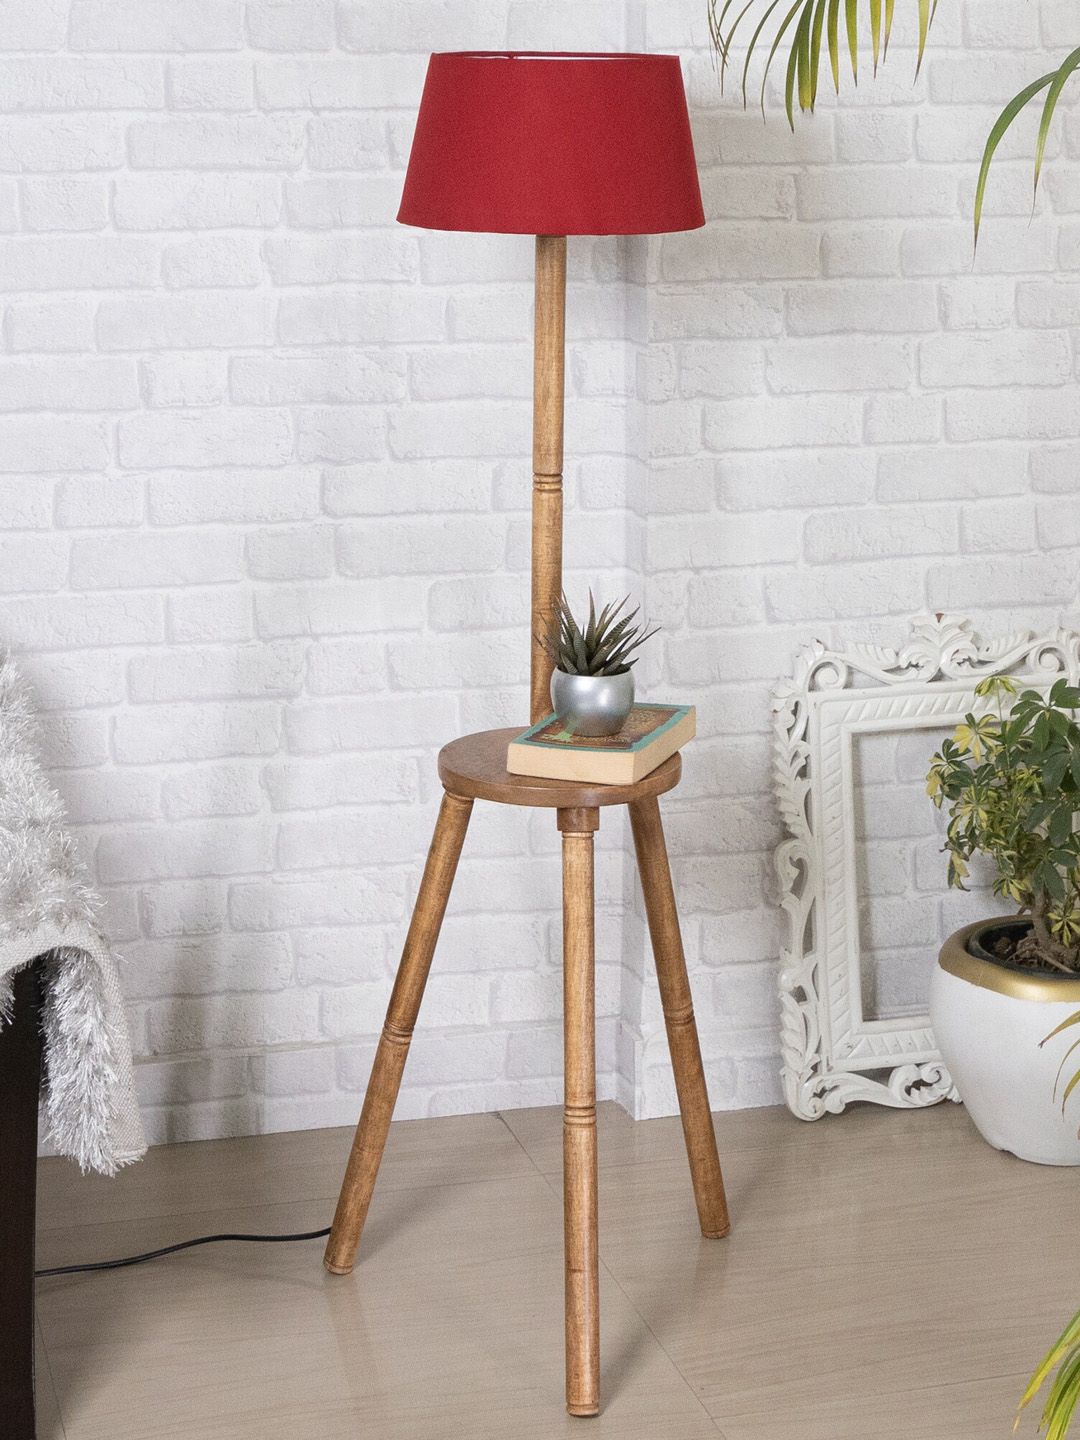 Homesake Red Tripod Floor Lamp With Shade Price in India